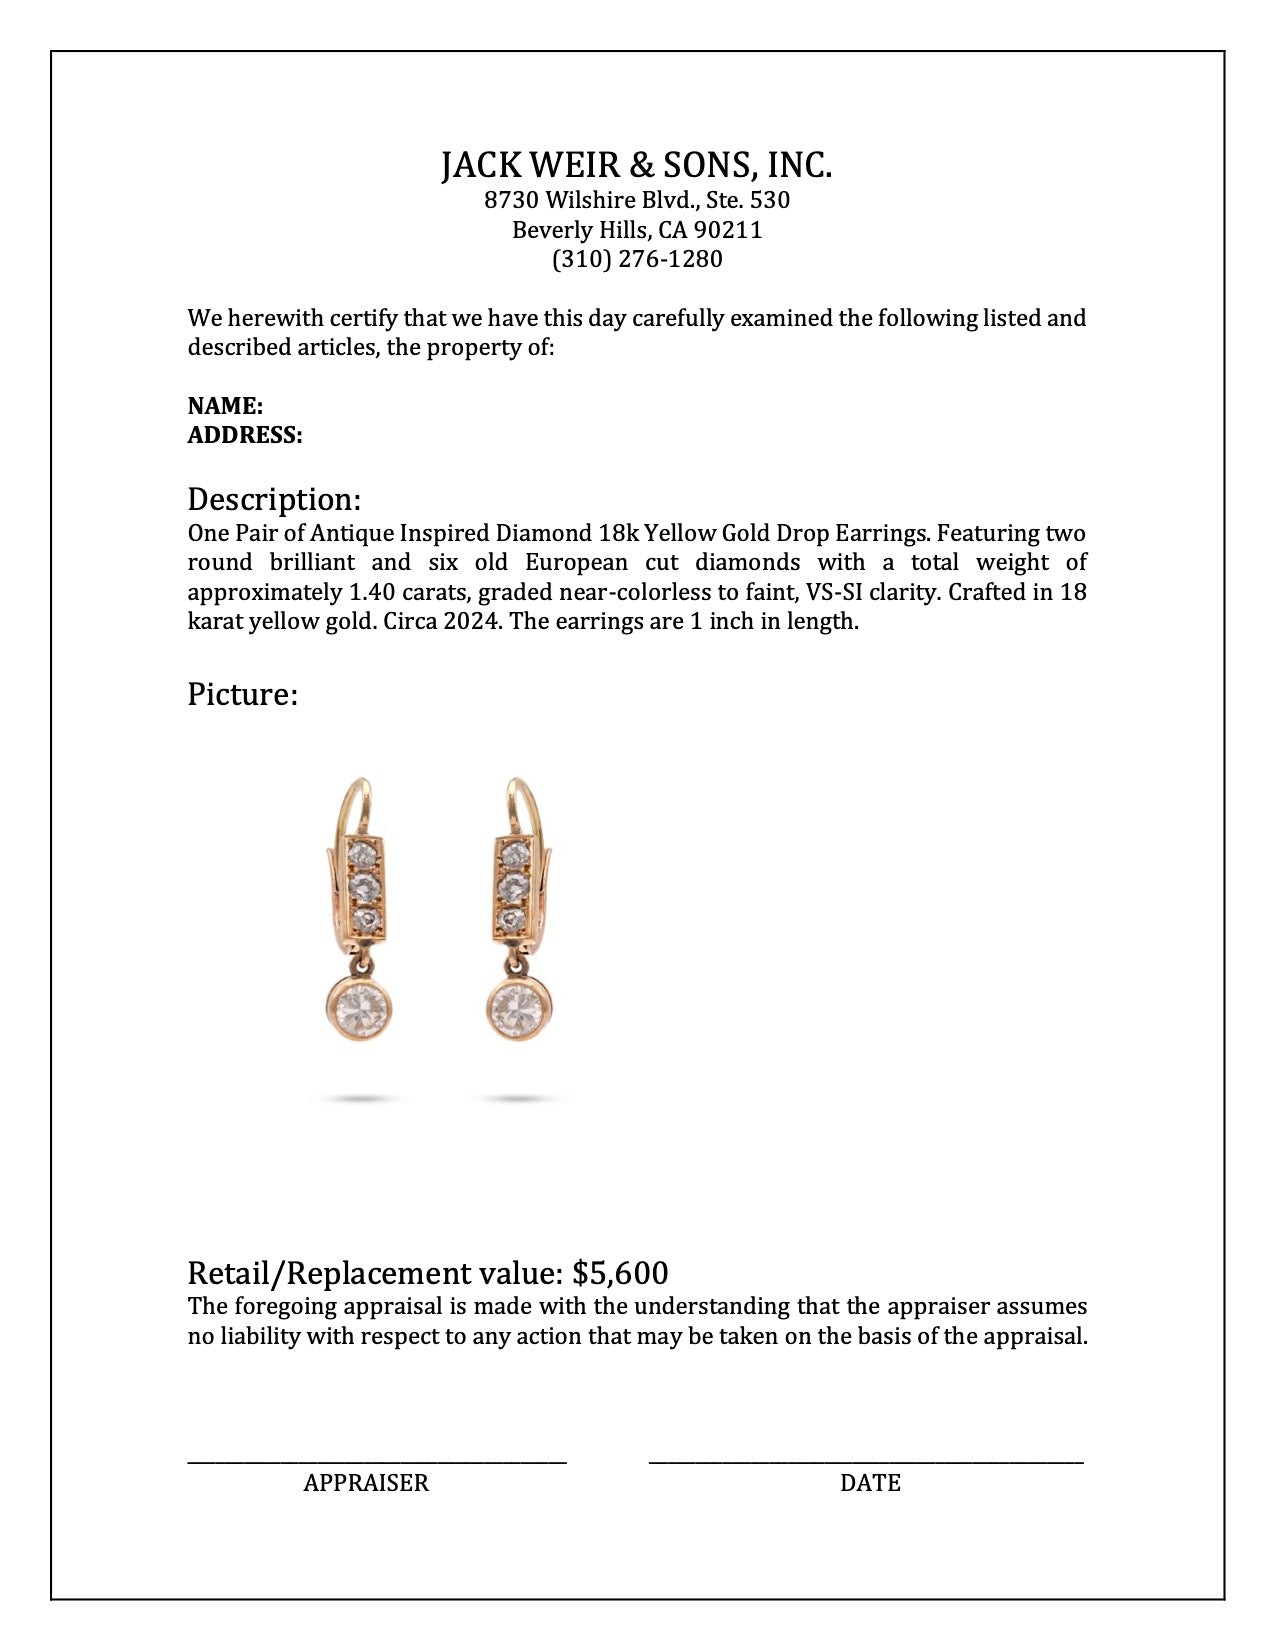 Antique Inspired Diamond 18k Yellow Gold Drop Earrings – Jack Weir & Sons